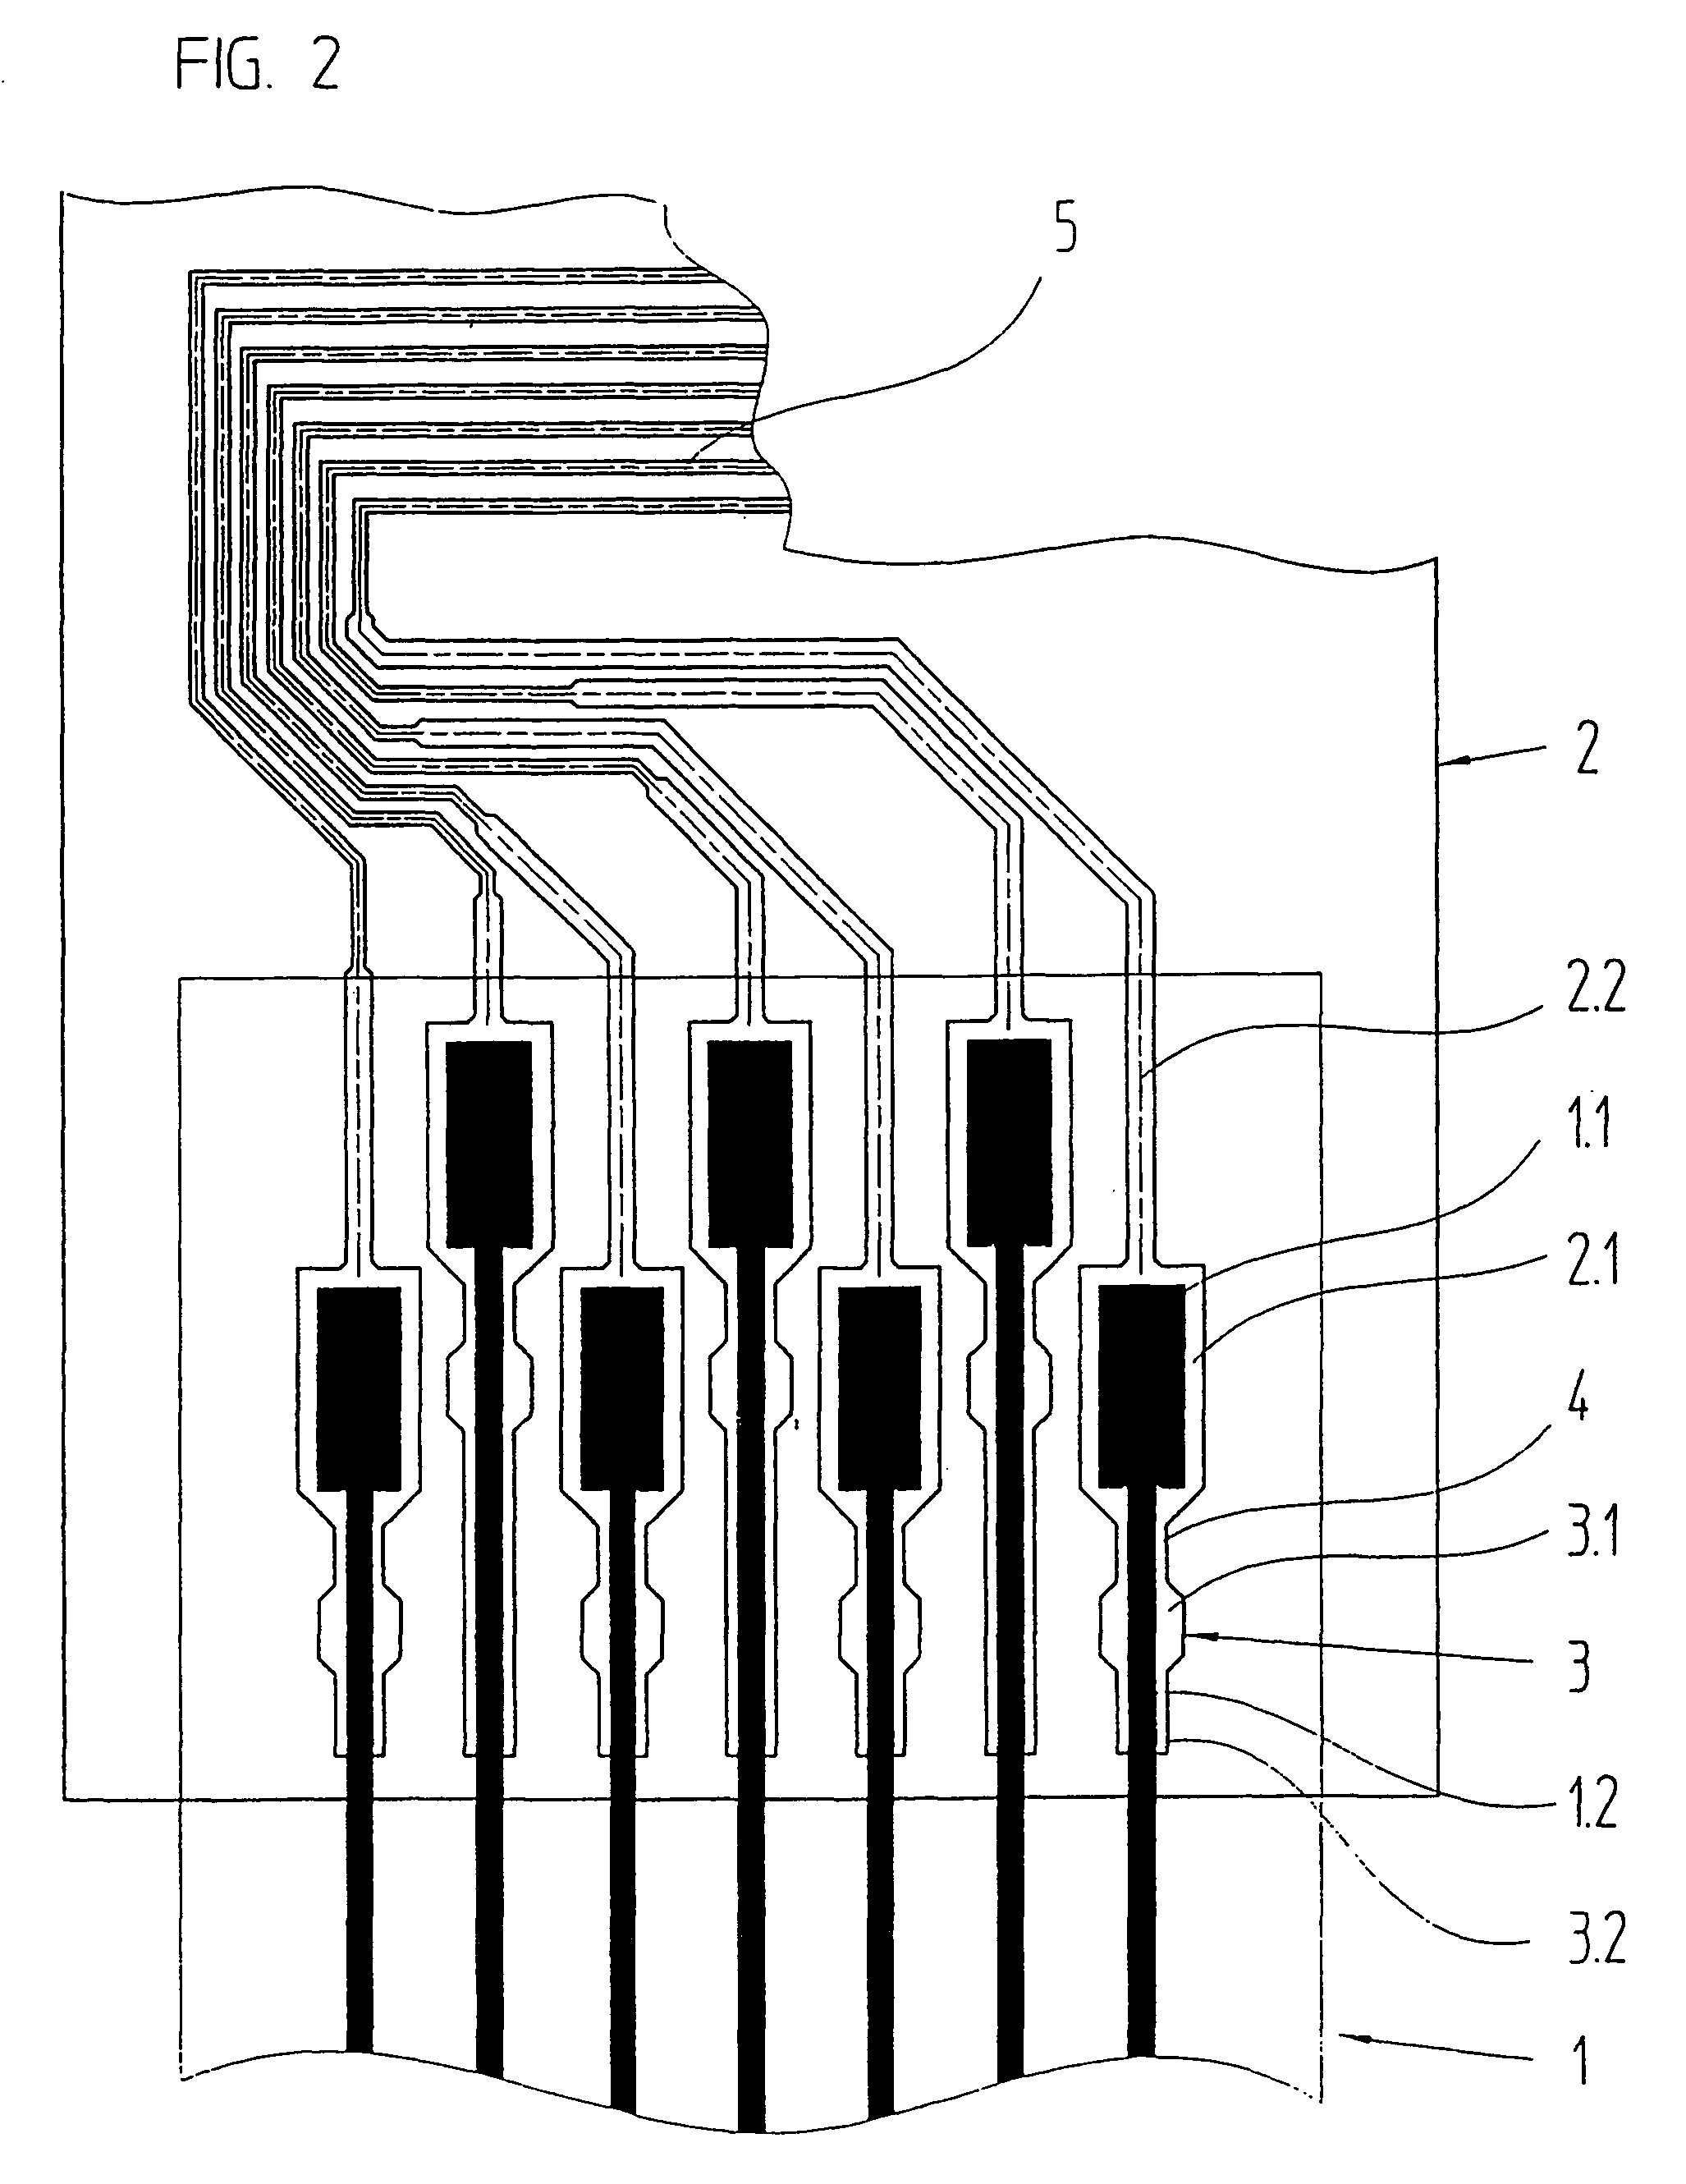 Composite comprised of flat conductor elements